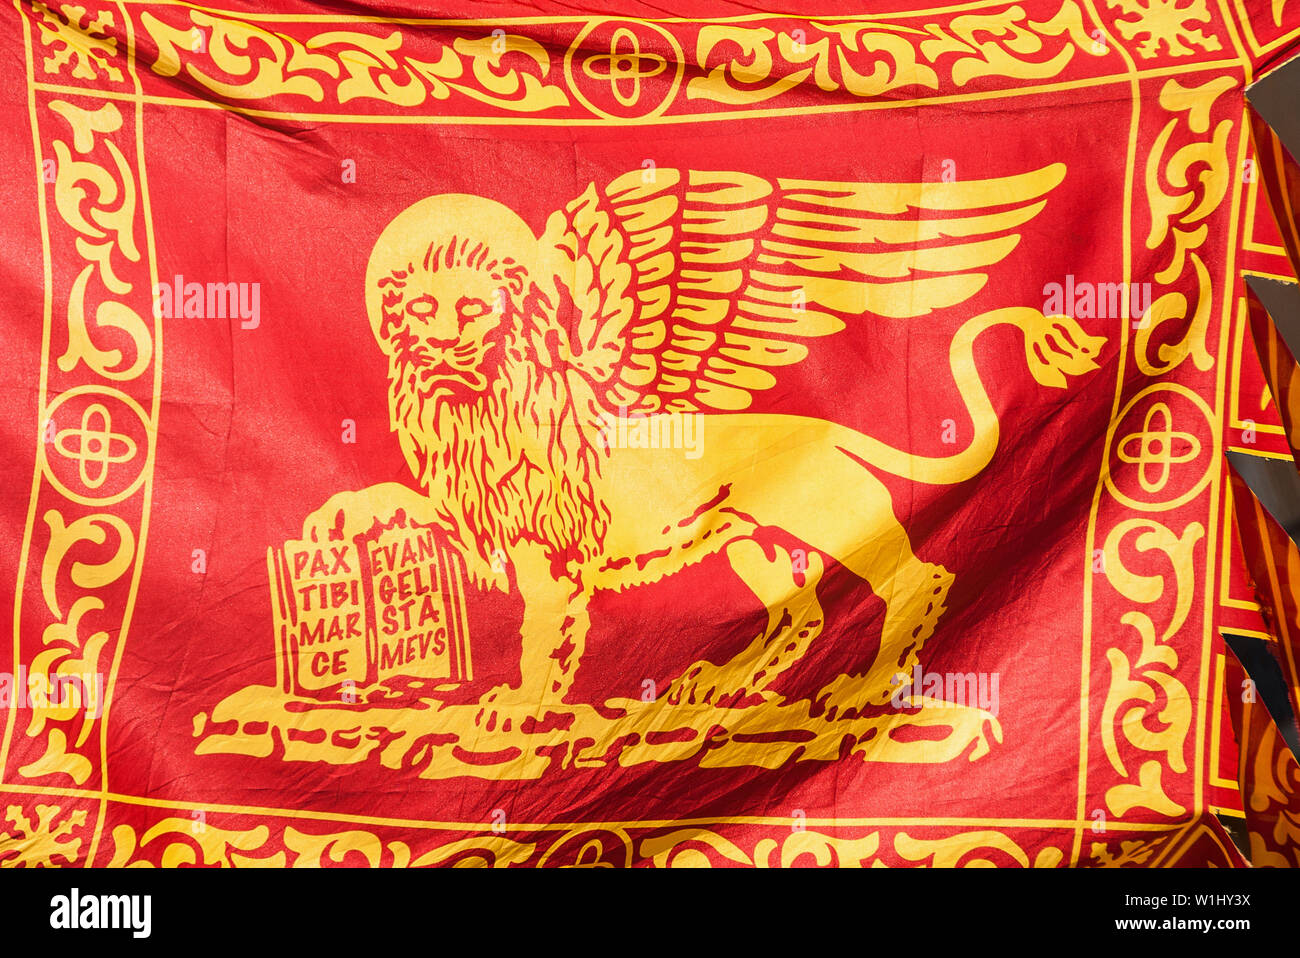 Old Venice Republic Flag with Saint Mark Lion and motto 'Pax tibi Marce, evangelista meus' (Peace be with thee, O Mark, my evangelist) fluttering in t Stock Photo